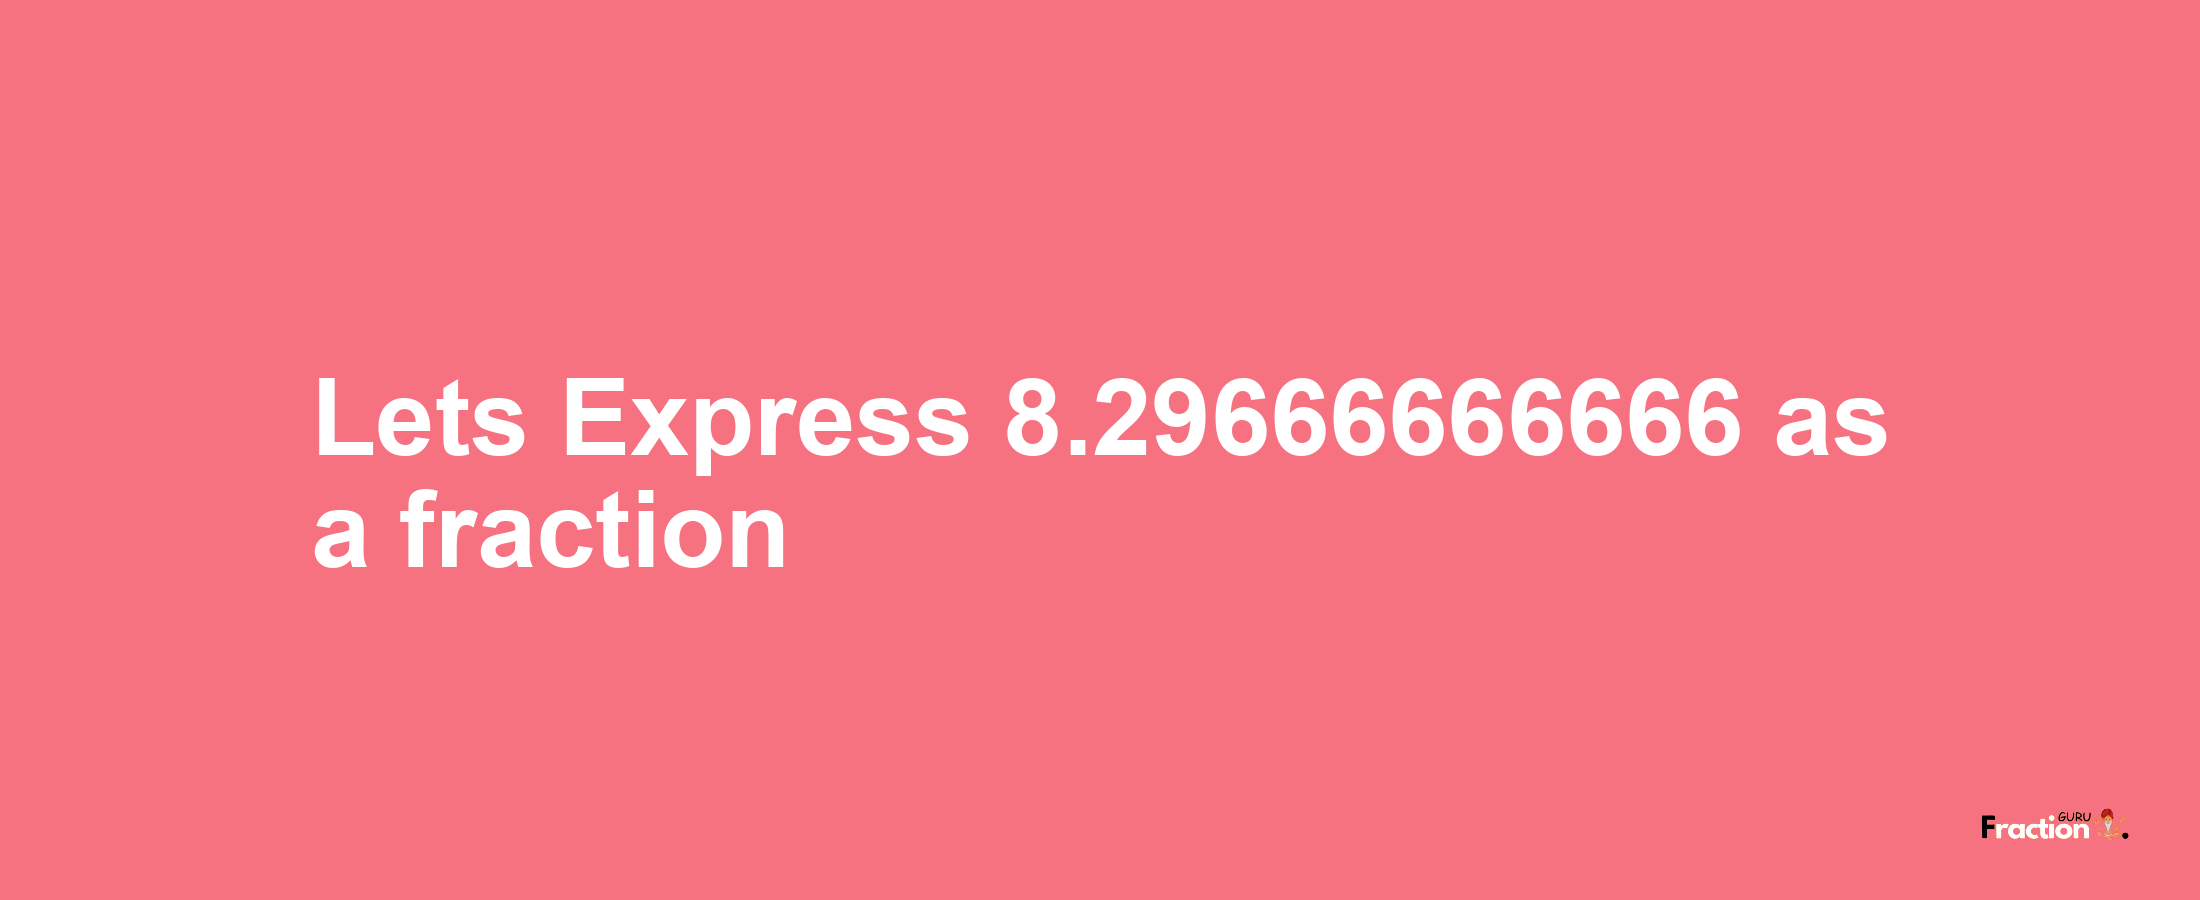 Lets Express 8.29666666666 as afraction